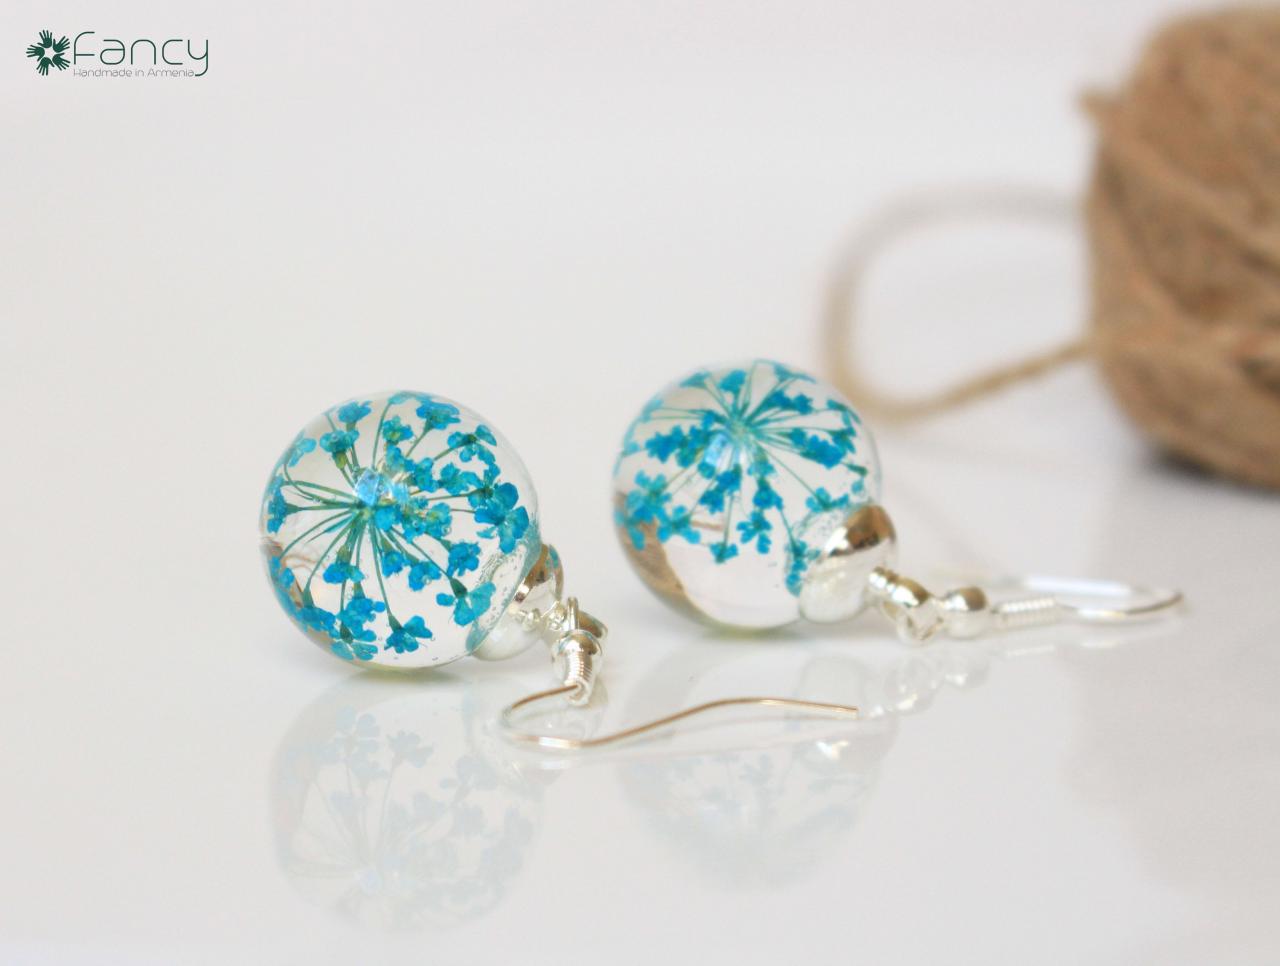 Turquoise Earrings For Bridesmaid, Real Flower Earrings, Pressed Flower Earrings, Turquoise Resin Jewelry , Turquoise Wedding Earrings,